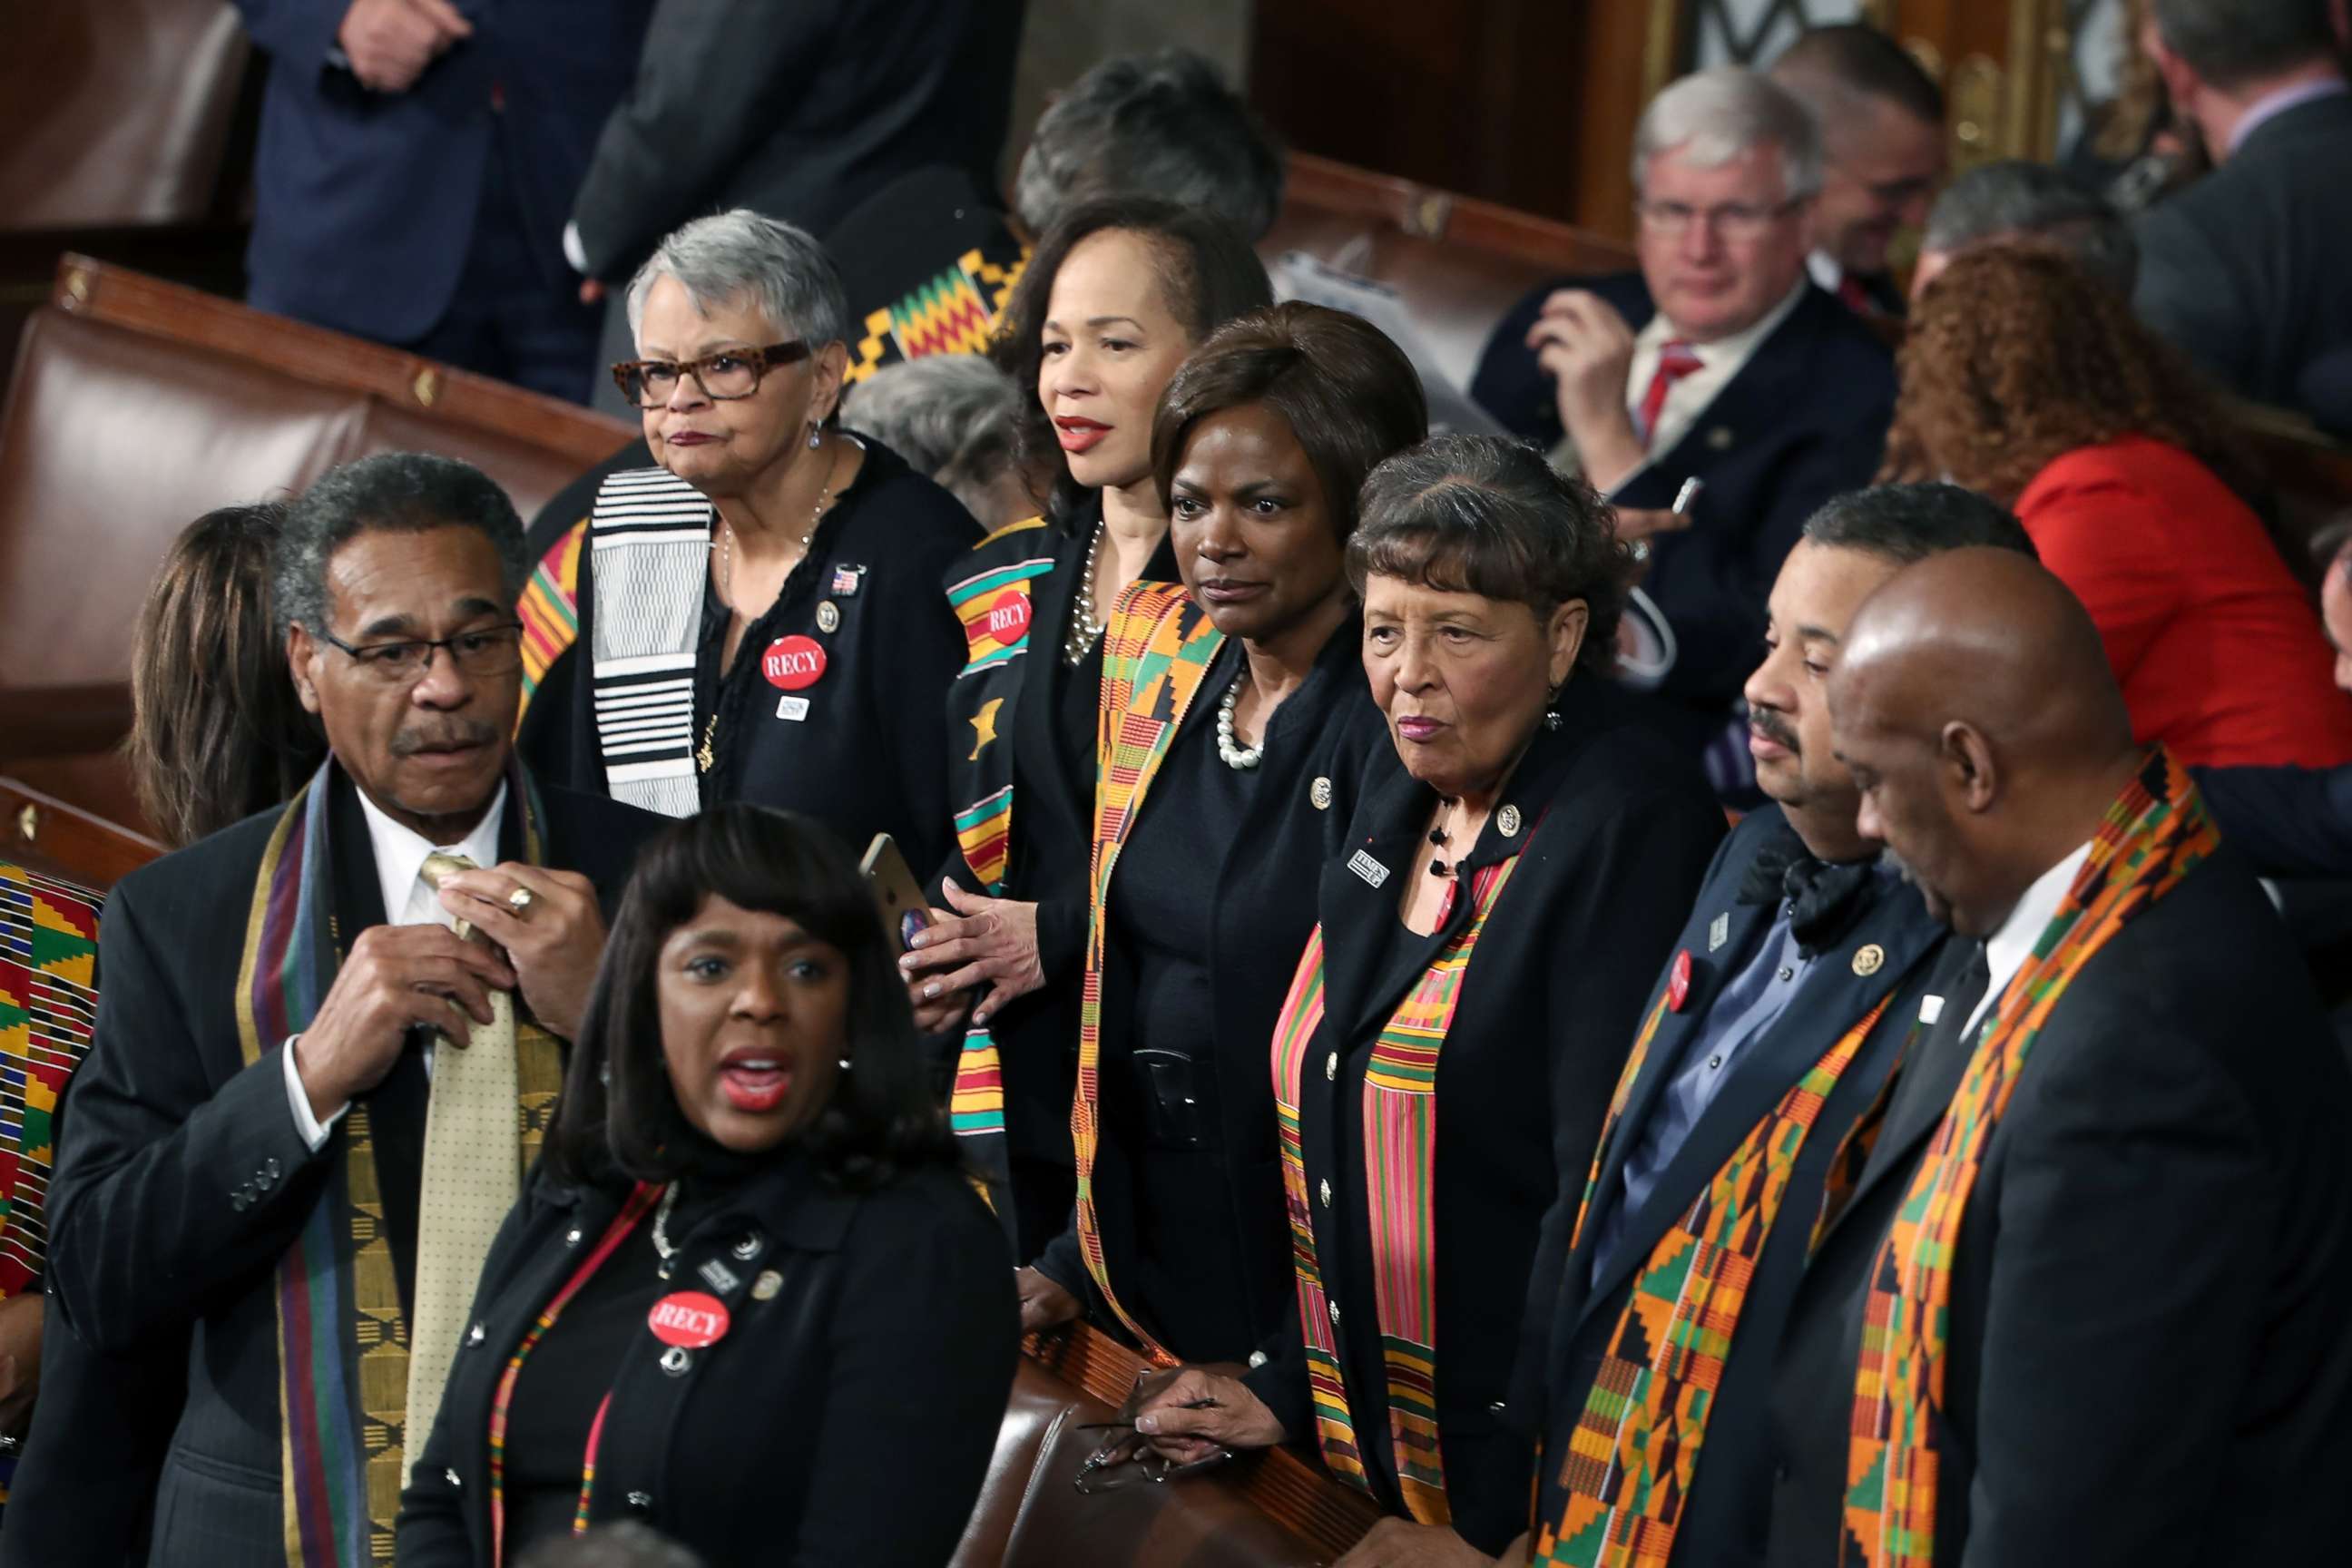 PHOTO: Members of Congress wear black clothing and Kente cloth in protest before the State of the Union address in the chamber of the U.S. House of Representatives Jan. 30, 2018 in Washington.